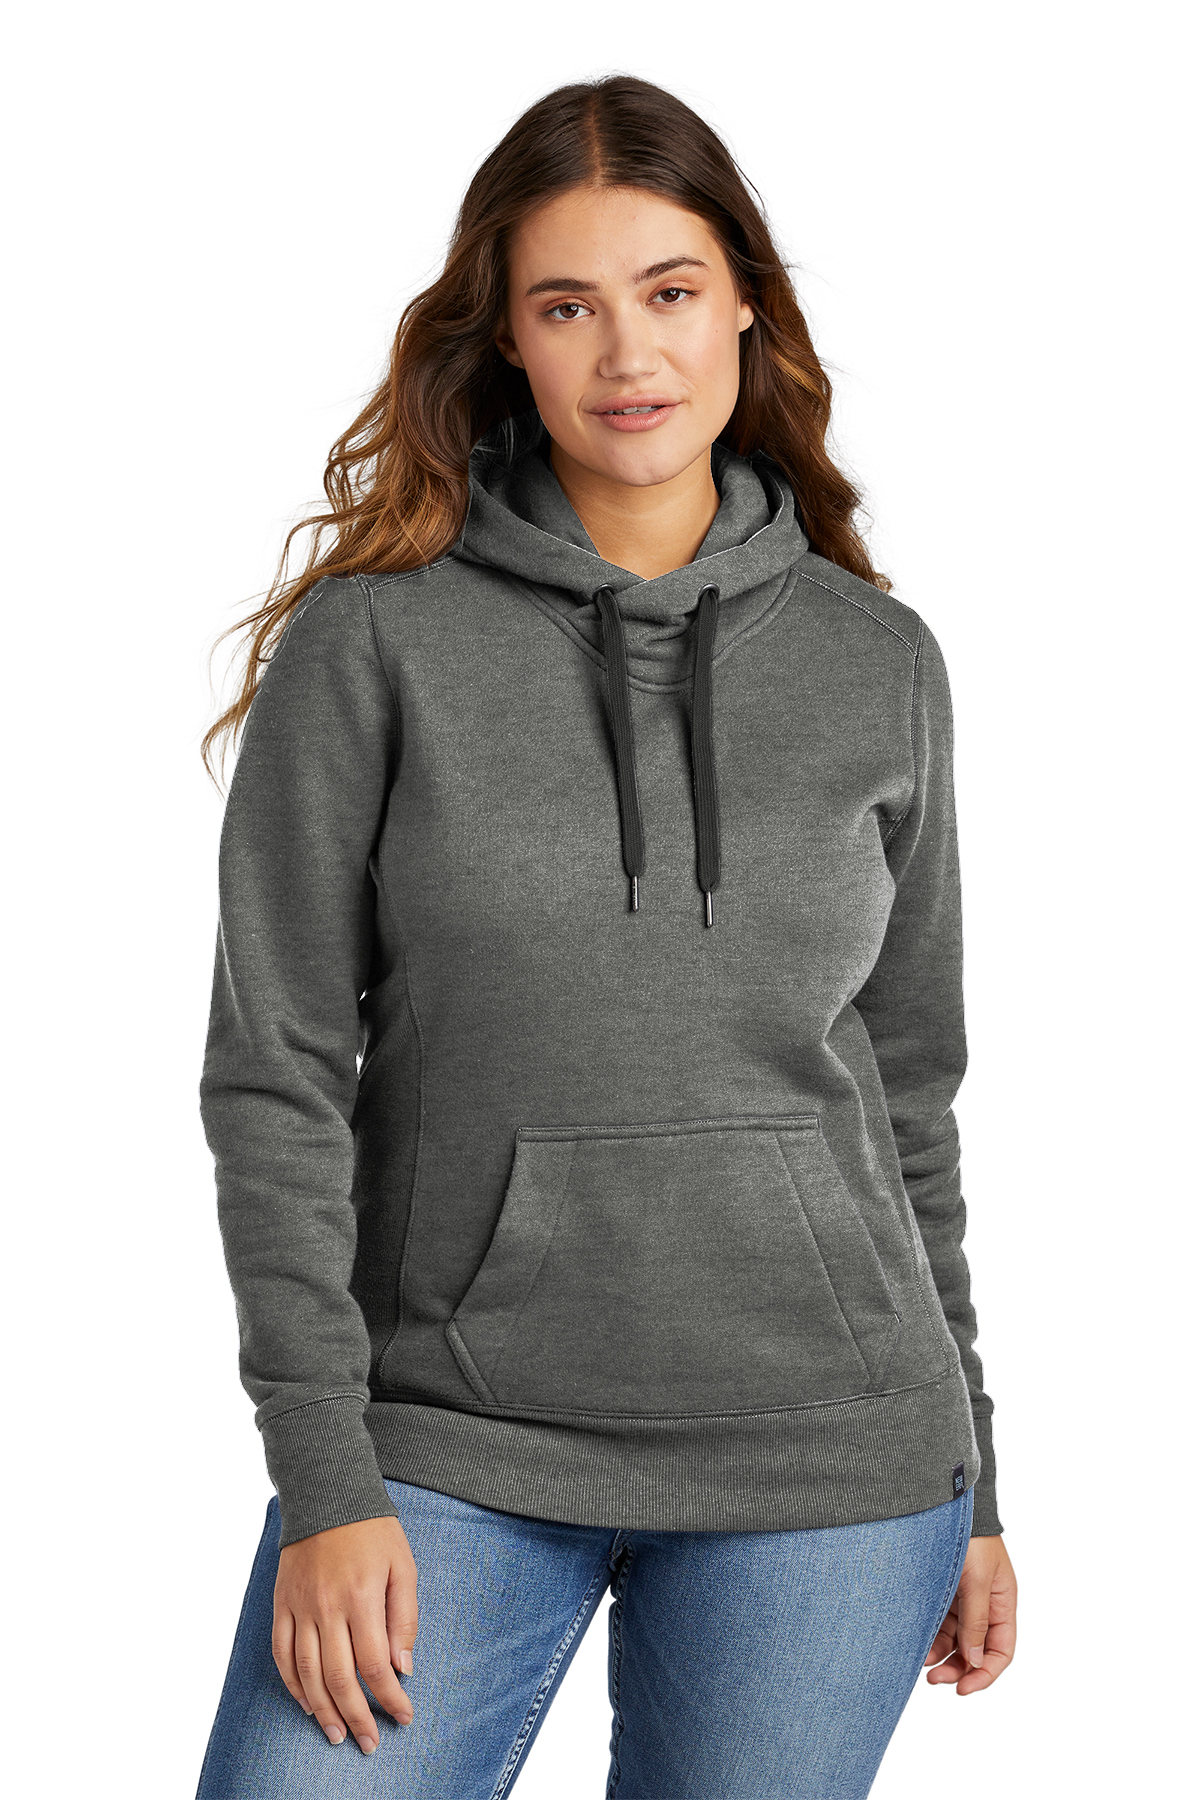 L.A. City Women's French Terry Hoodie